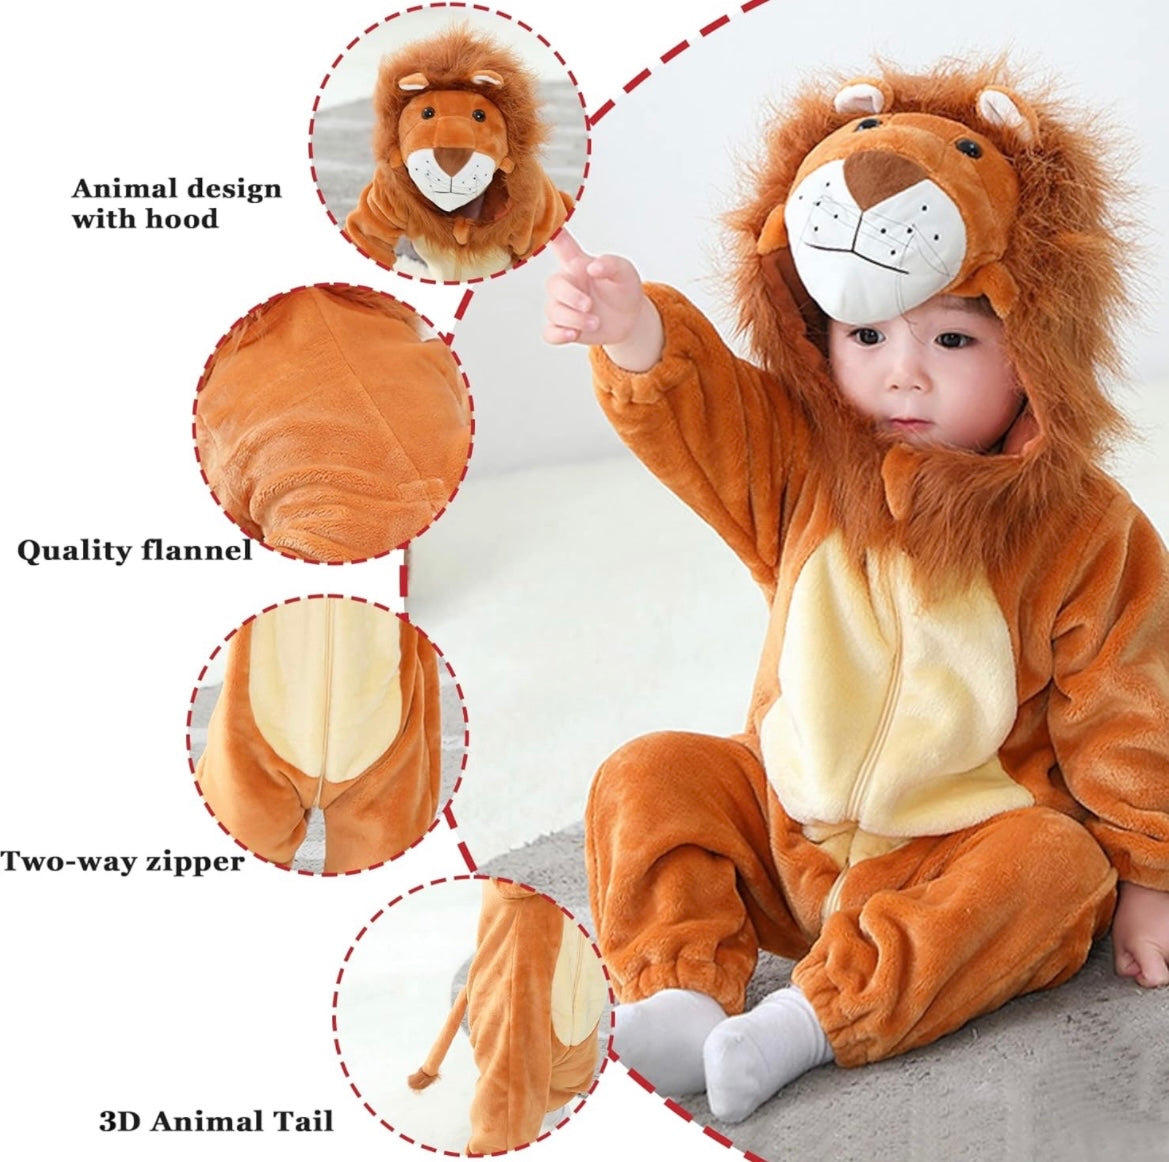 Baby Hooded Jumpsuit-Lion